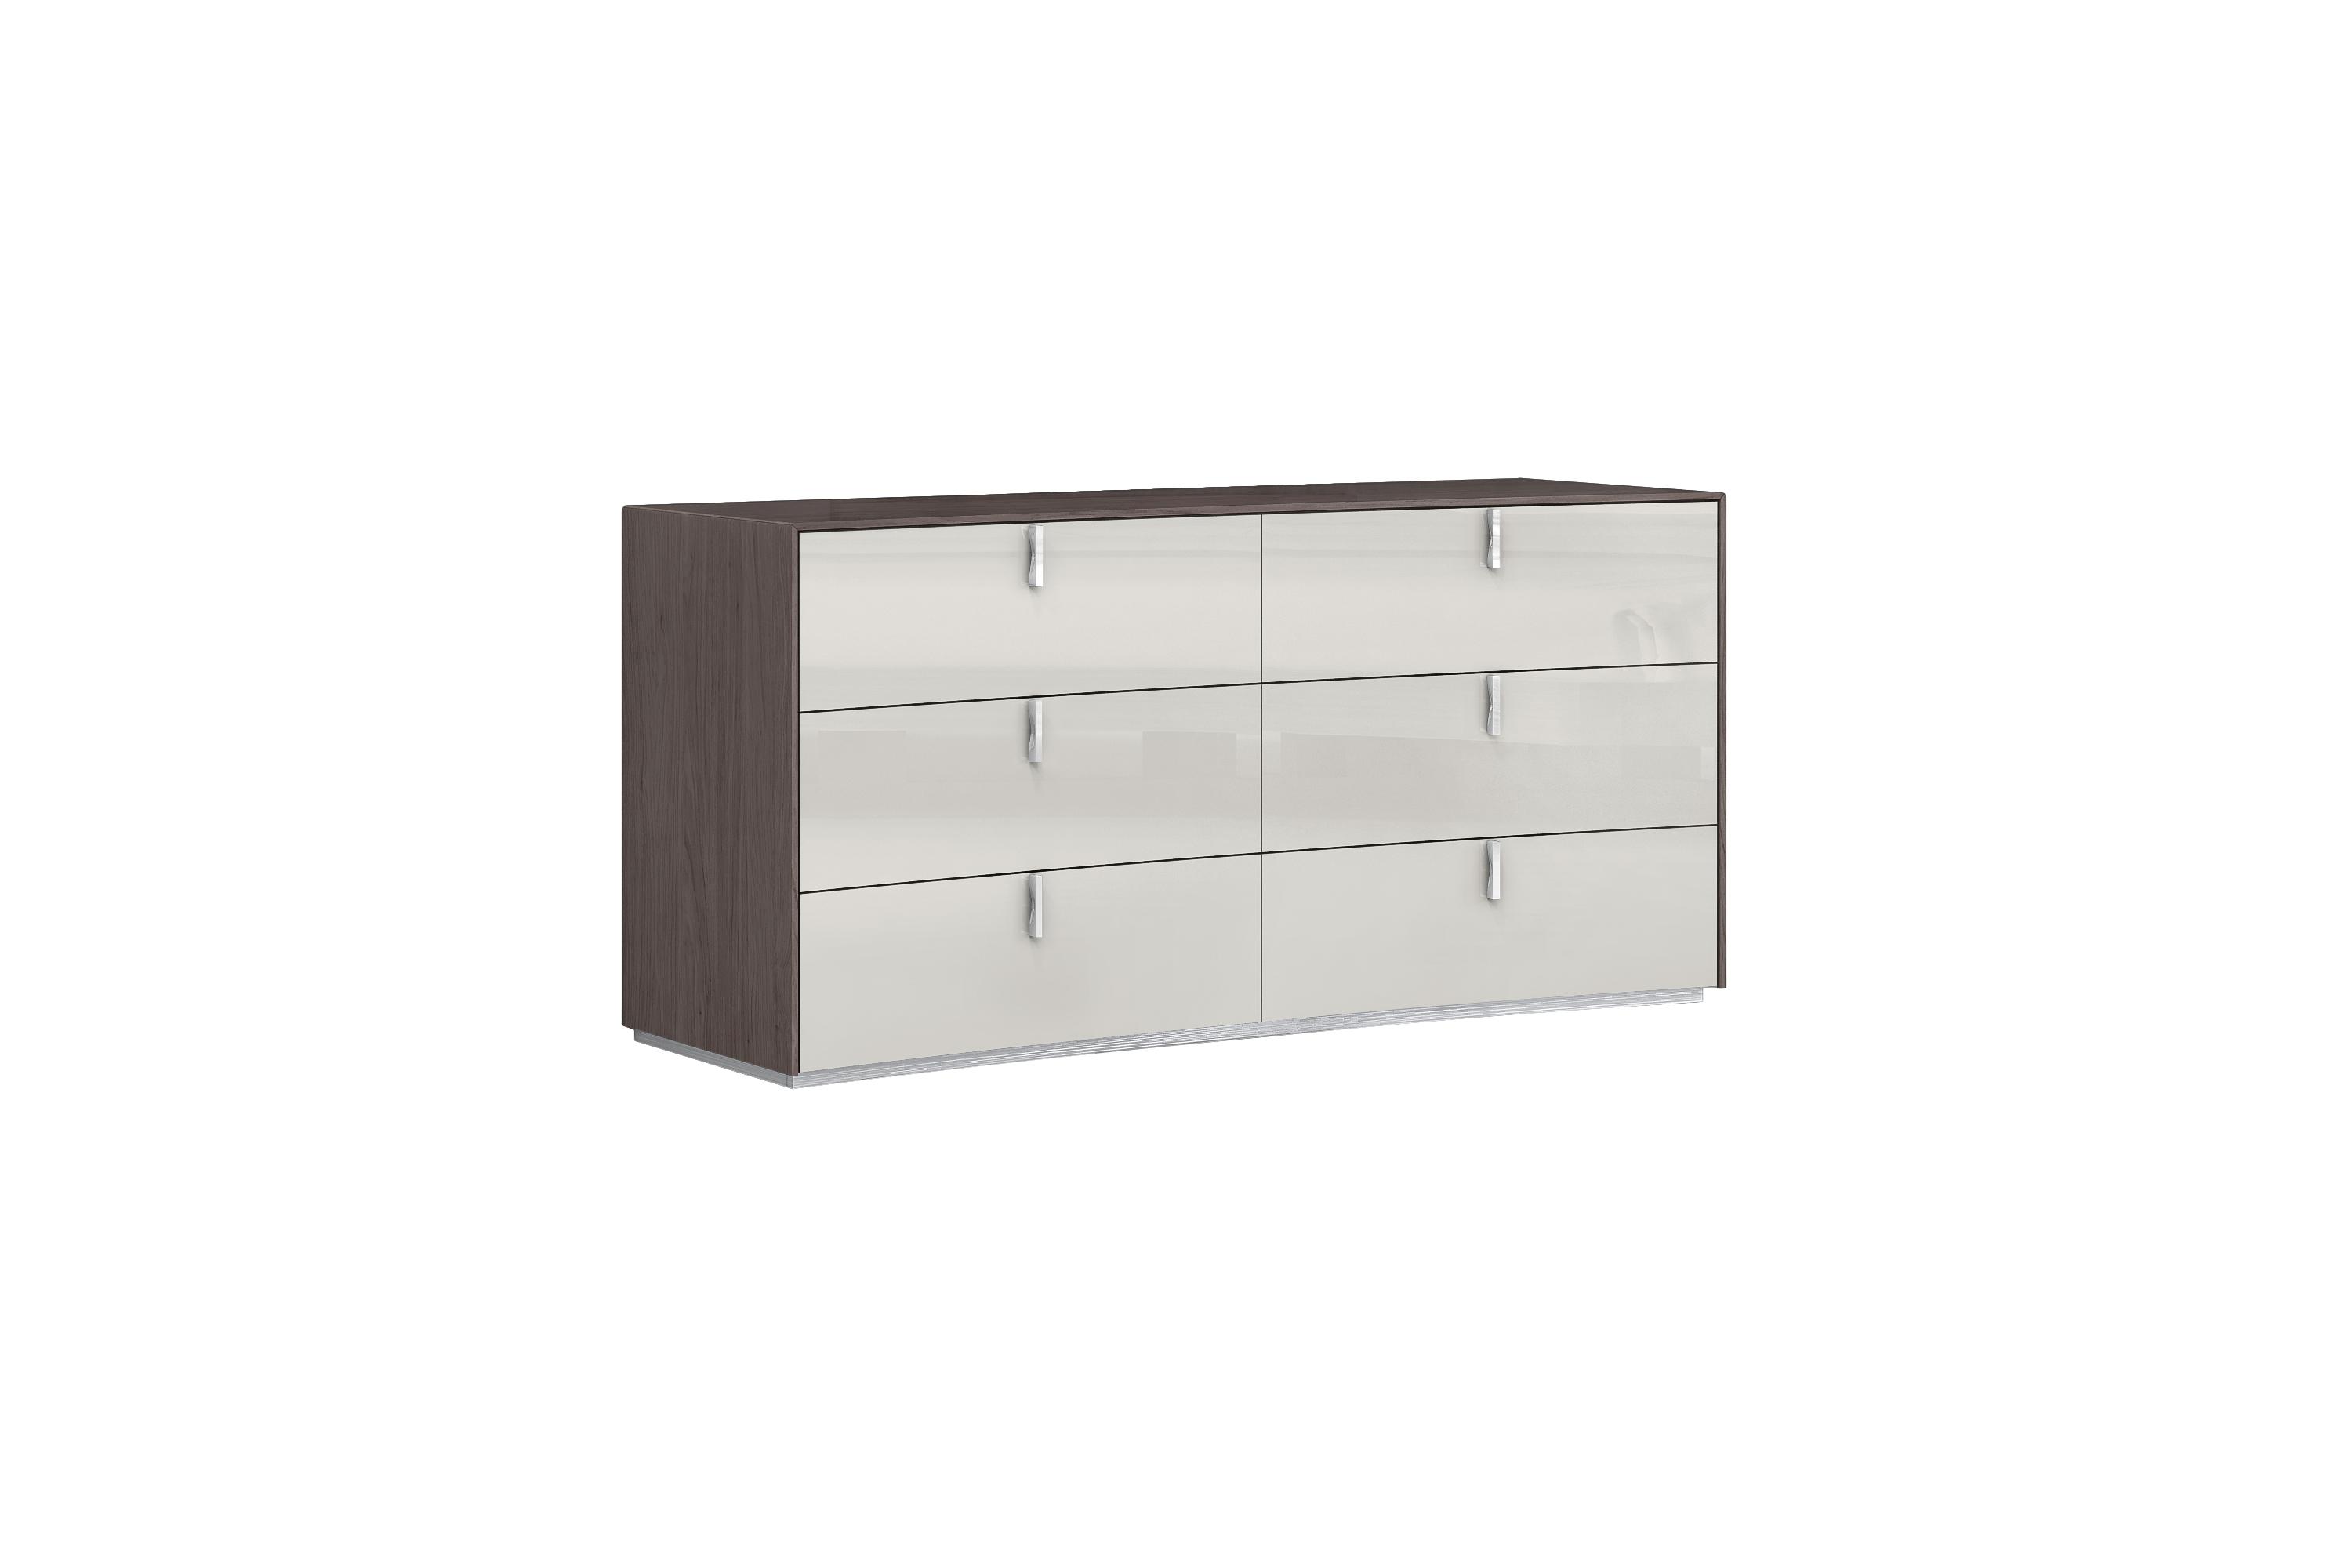 

    
Contemporary Chestnut Finish Solid Wood Dresser DR1754-GRY/LGRY Berlin
